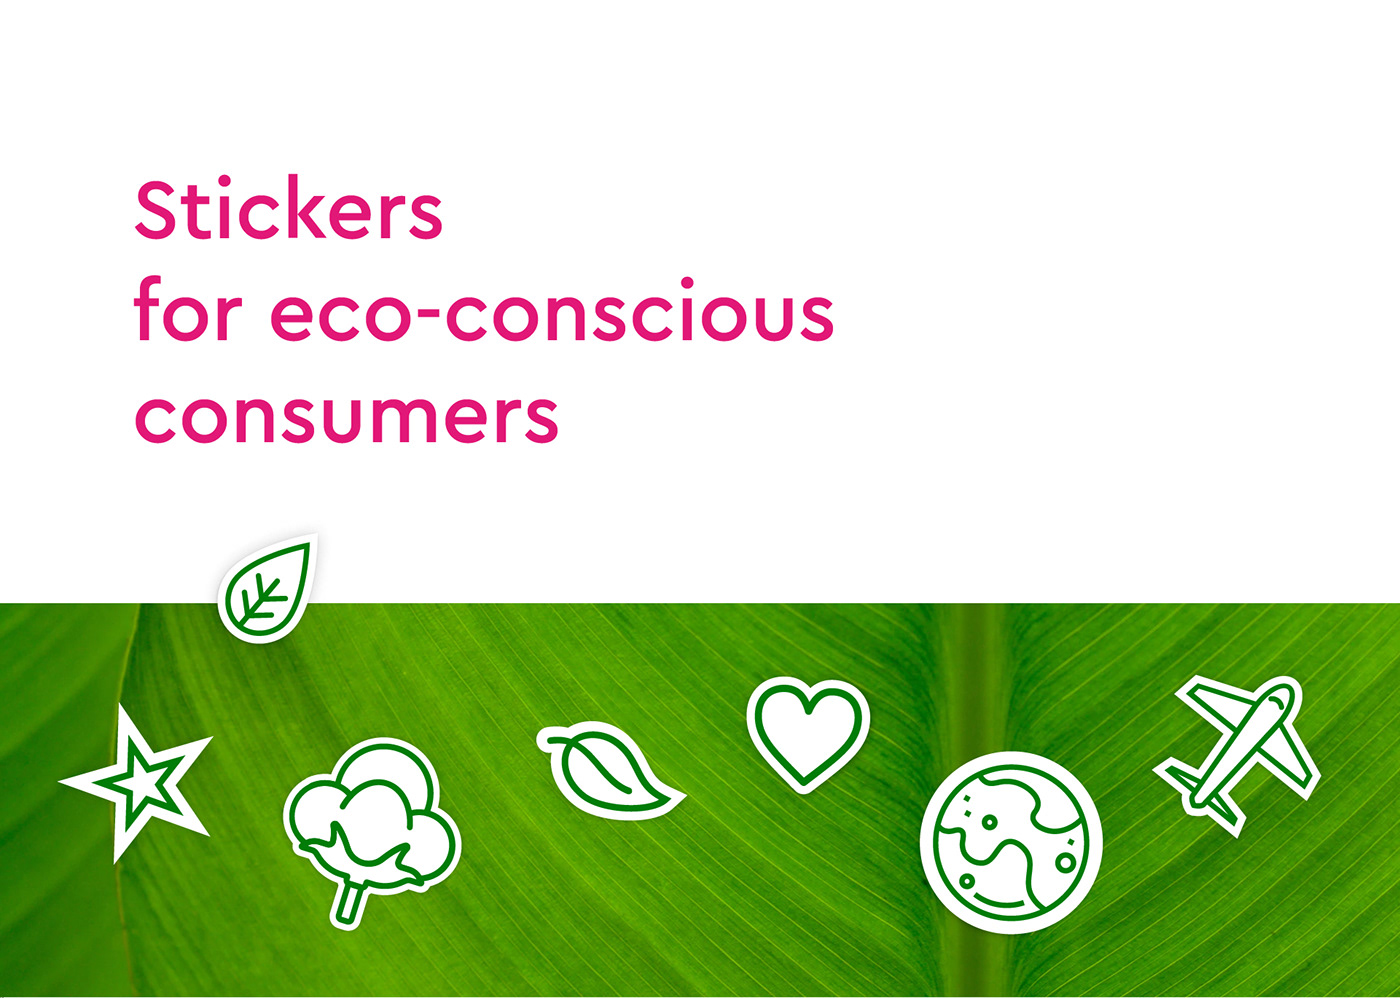 stickers for eco-conscious consumers by synergetic laundry